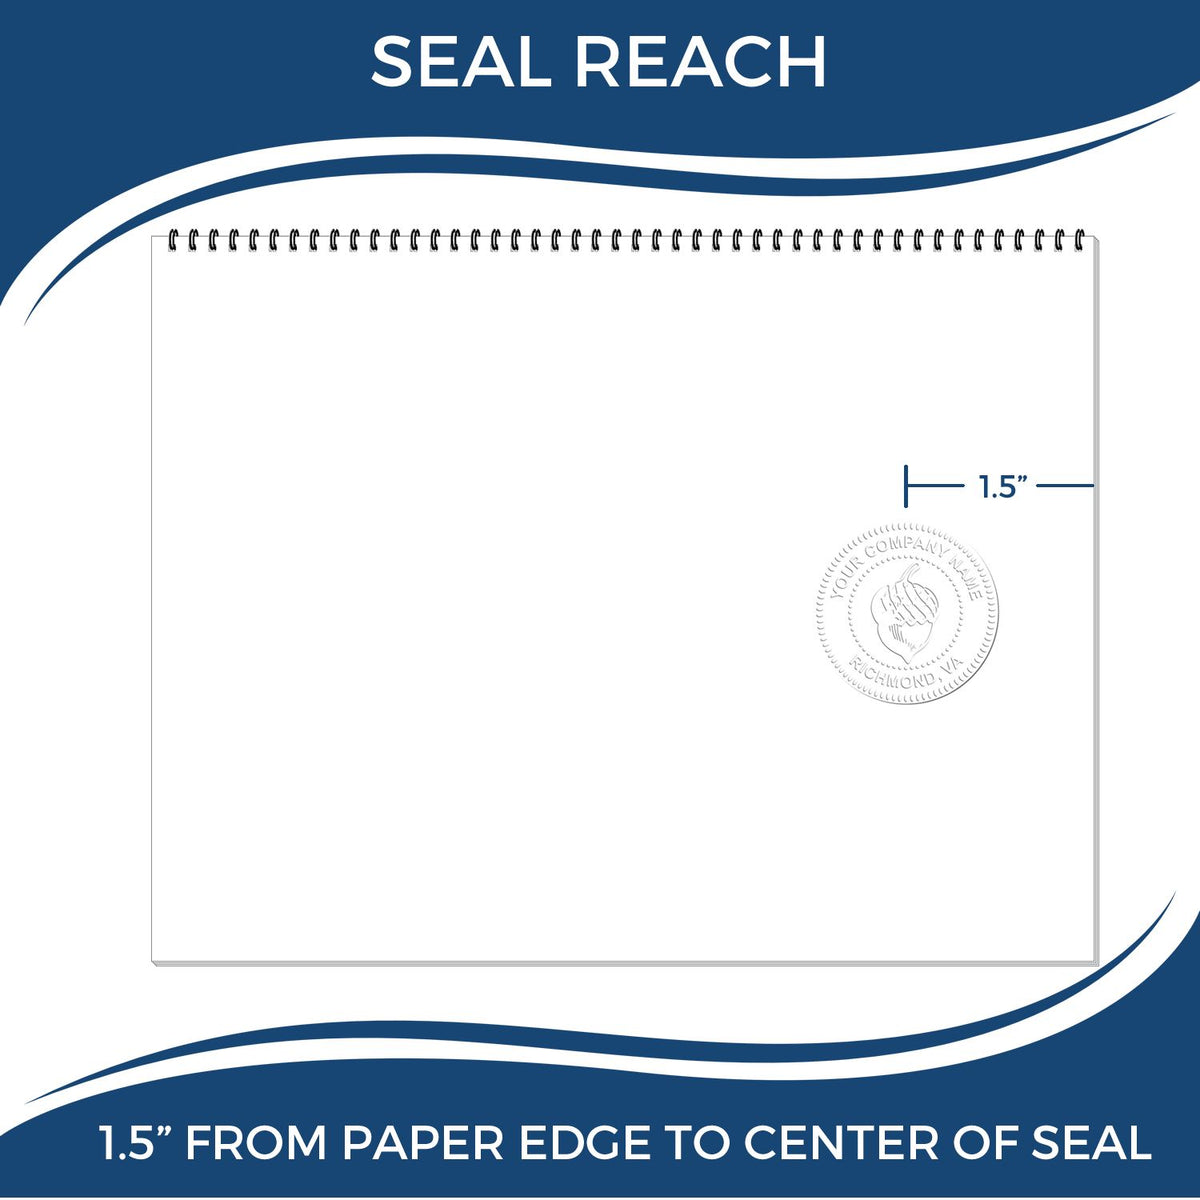 An infographic showing the seal reach which is represented by a ruler and a miniature seal image of the Handheld Virginia Professional Geologist Embosser